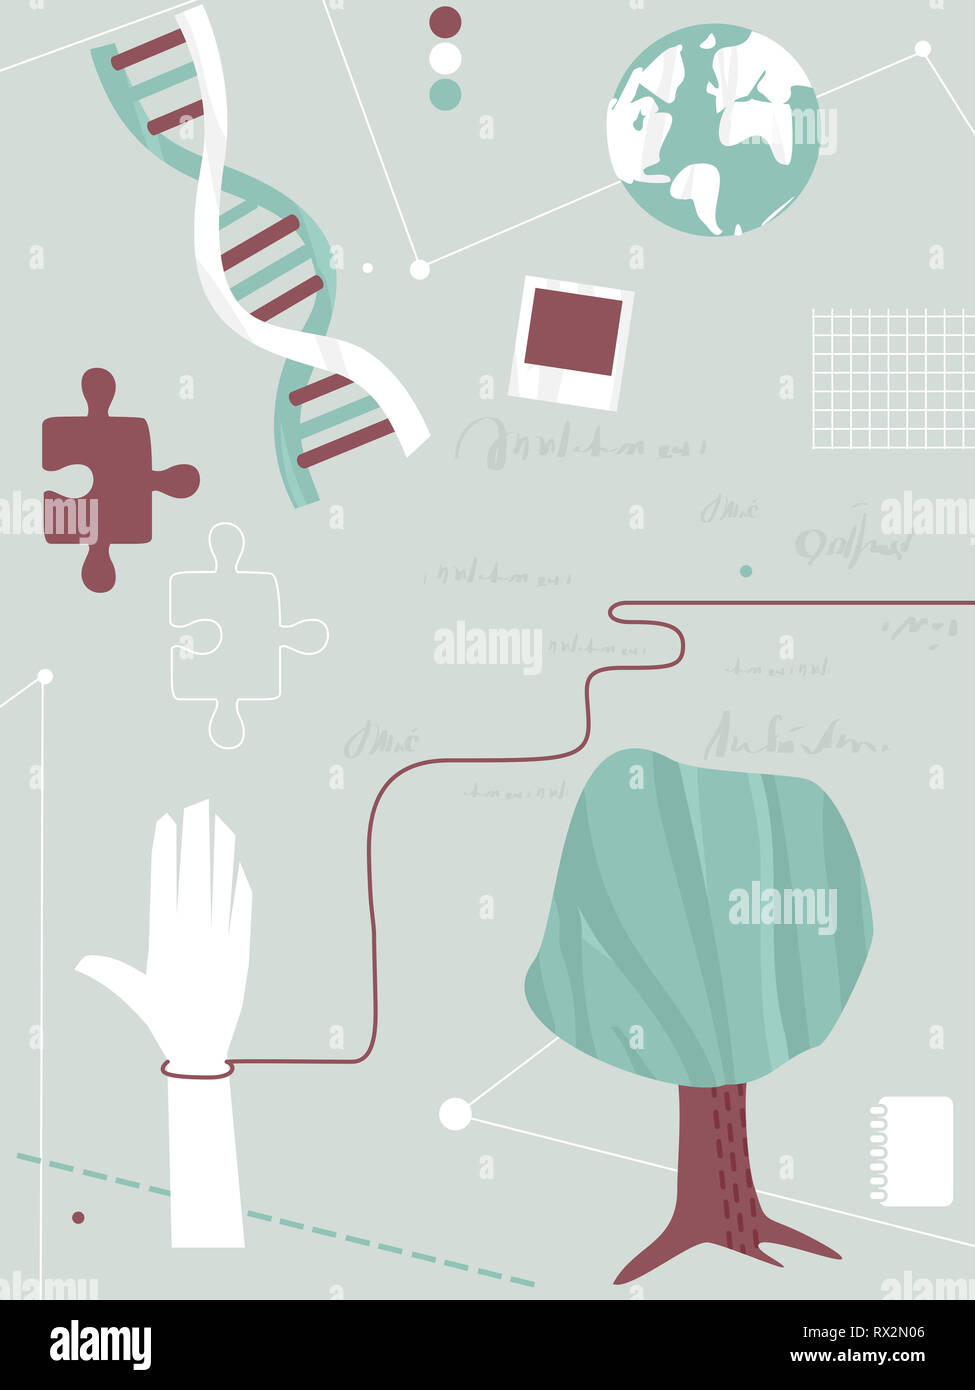 Background Illustration of a Hand, DNA, Earth and Tree for Genealogy Design Stock Photo